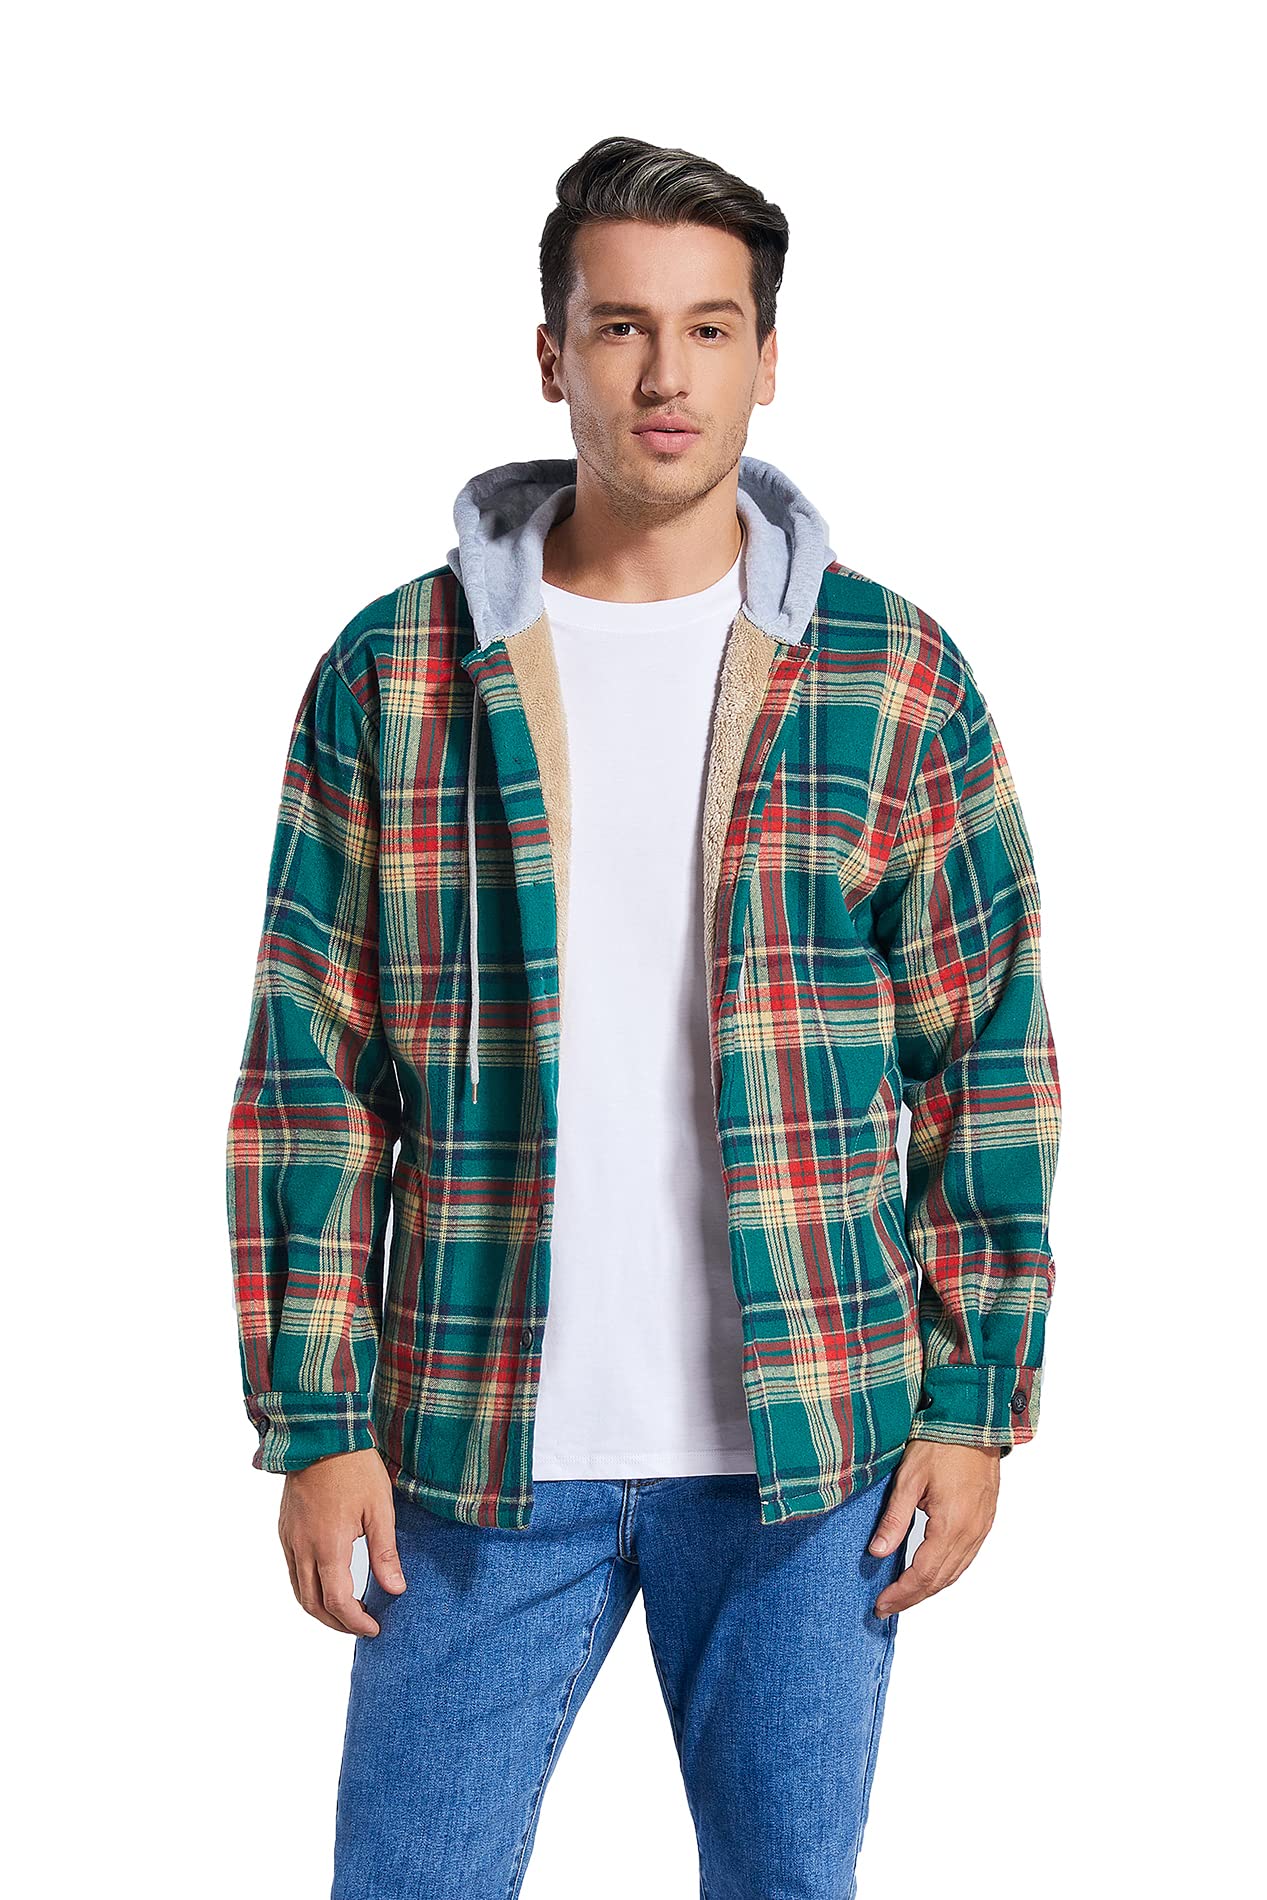 Derbars Men's Cotton Plaid Shirts Jacket Fleece Lined Flannel Shirts Sherpa Button Down Jackets with Hood for Men